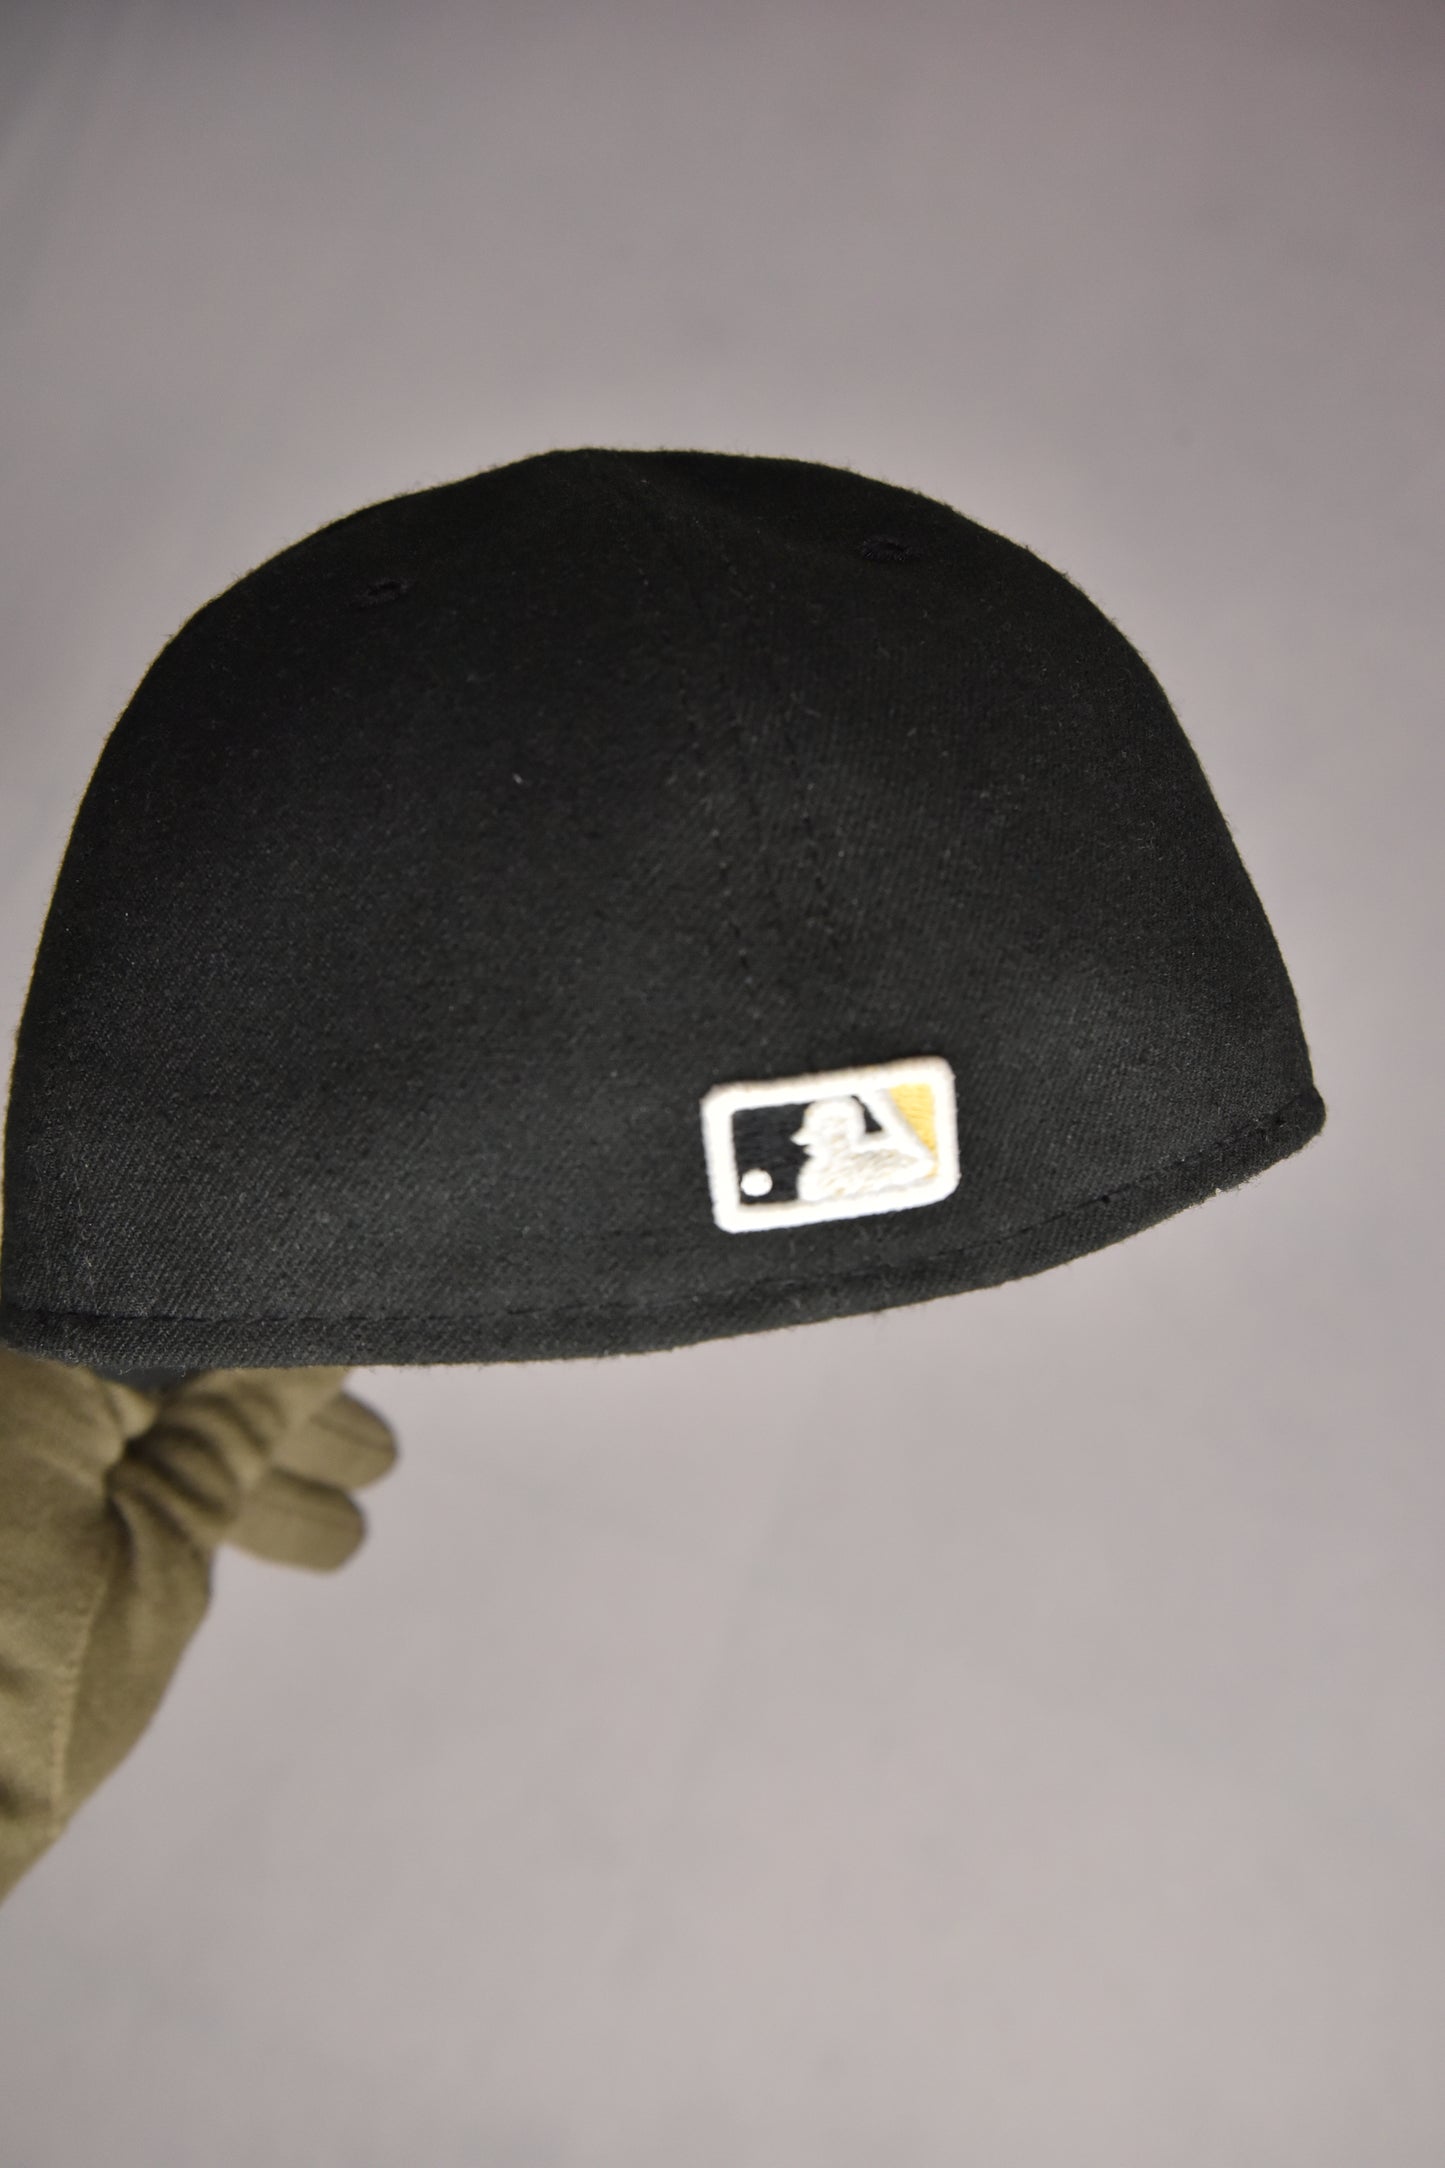 Pittsburgh Pirates New Era Hat Made in USA Vintage / 7th